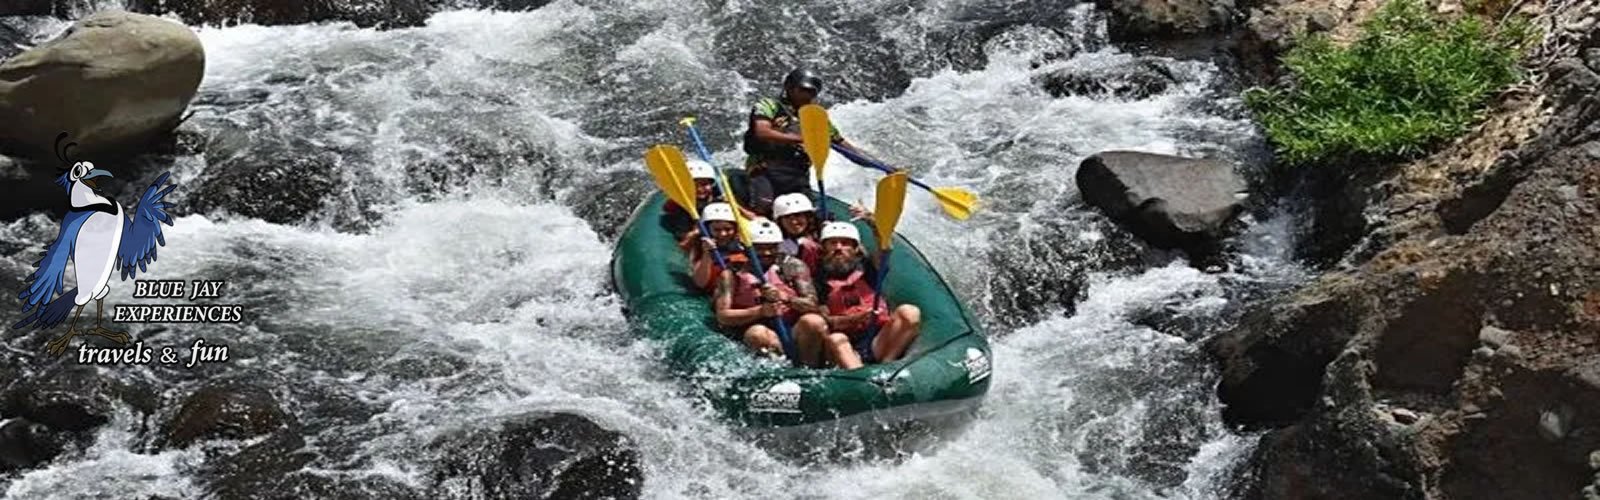 White Water Rafting at Tenorio river class lll